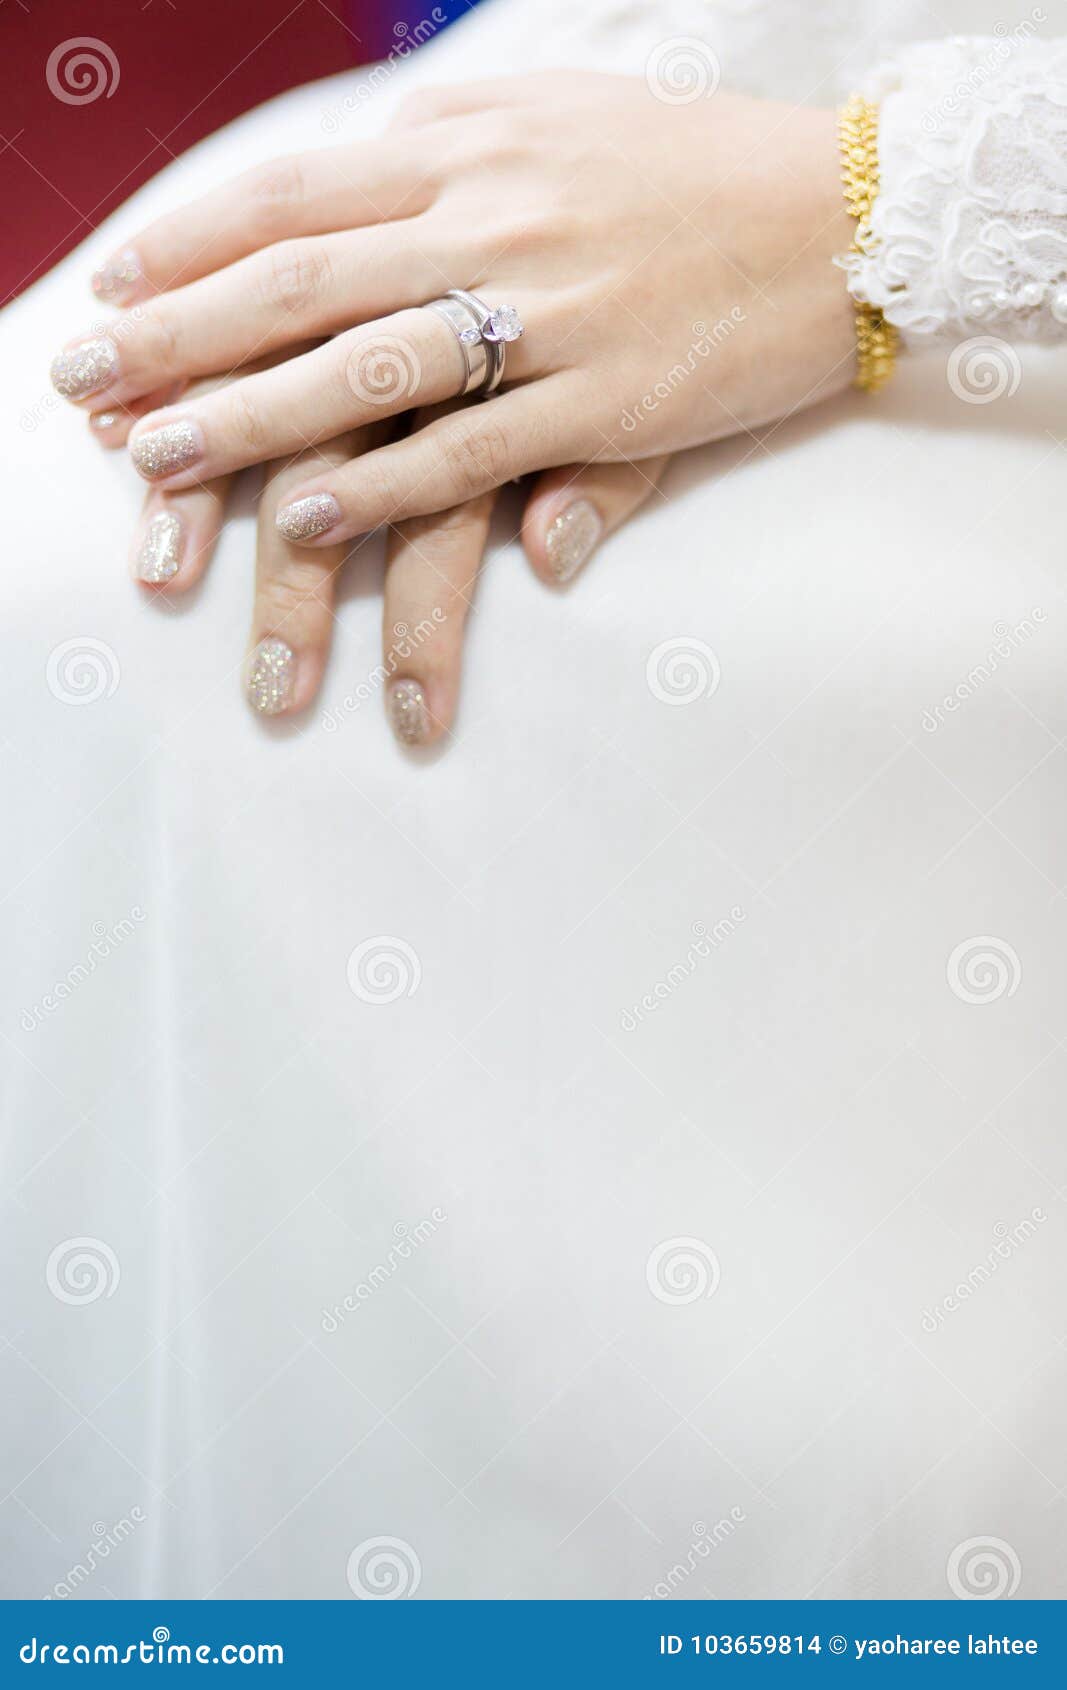 Muslim Bride Hand with Ring Stock Photo - Image of black, dress: 103659814